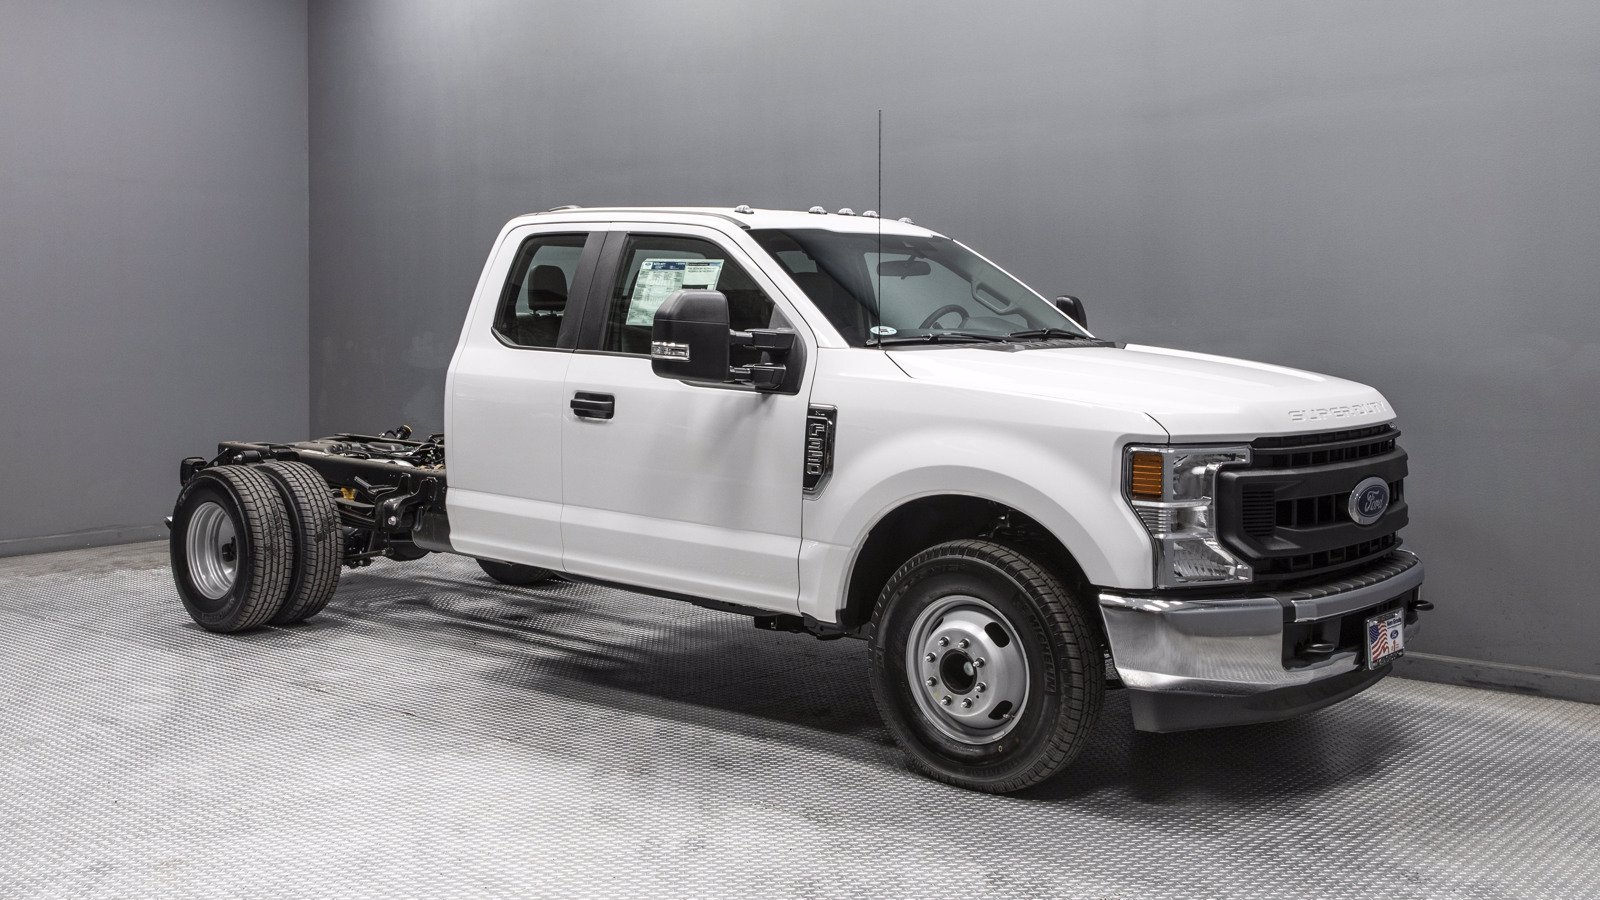 New 2020 Ford Super Duty F350 DRW XL Extended Cab ChassisCab in Buena